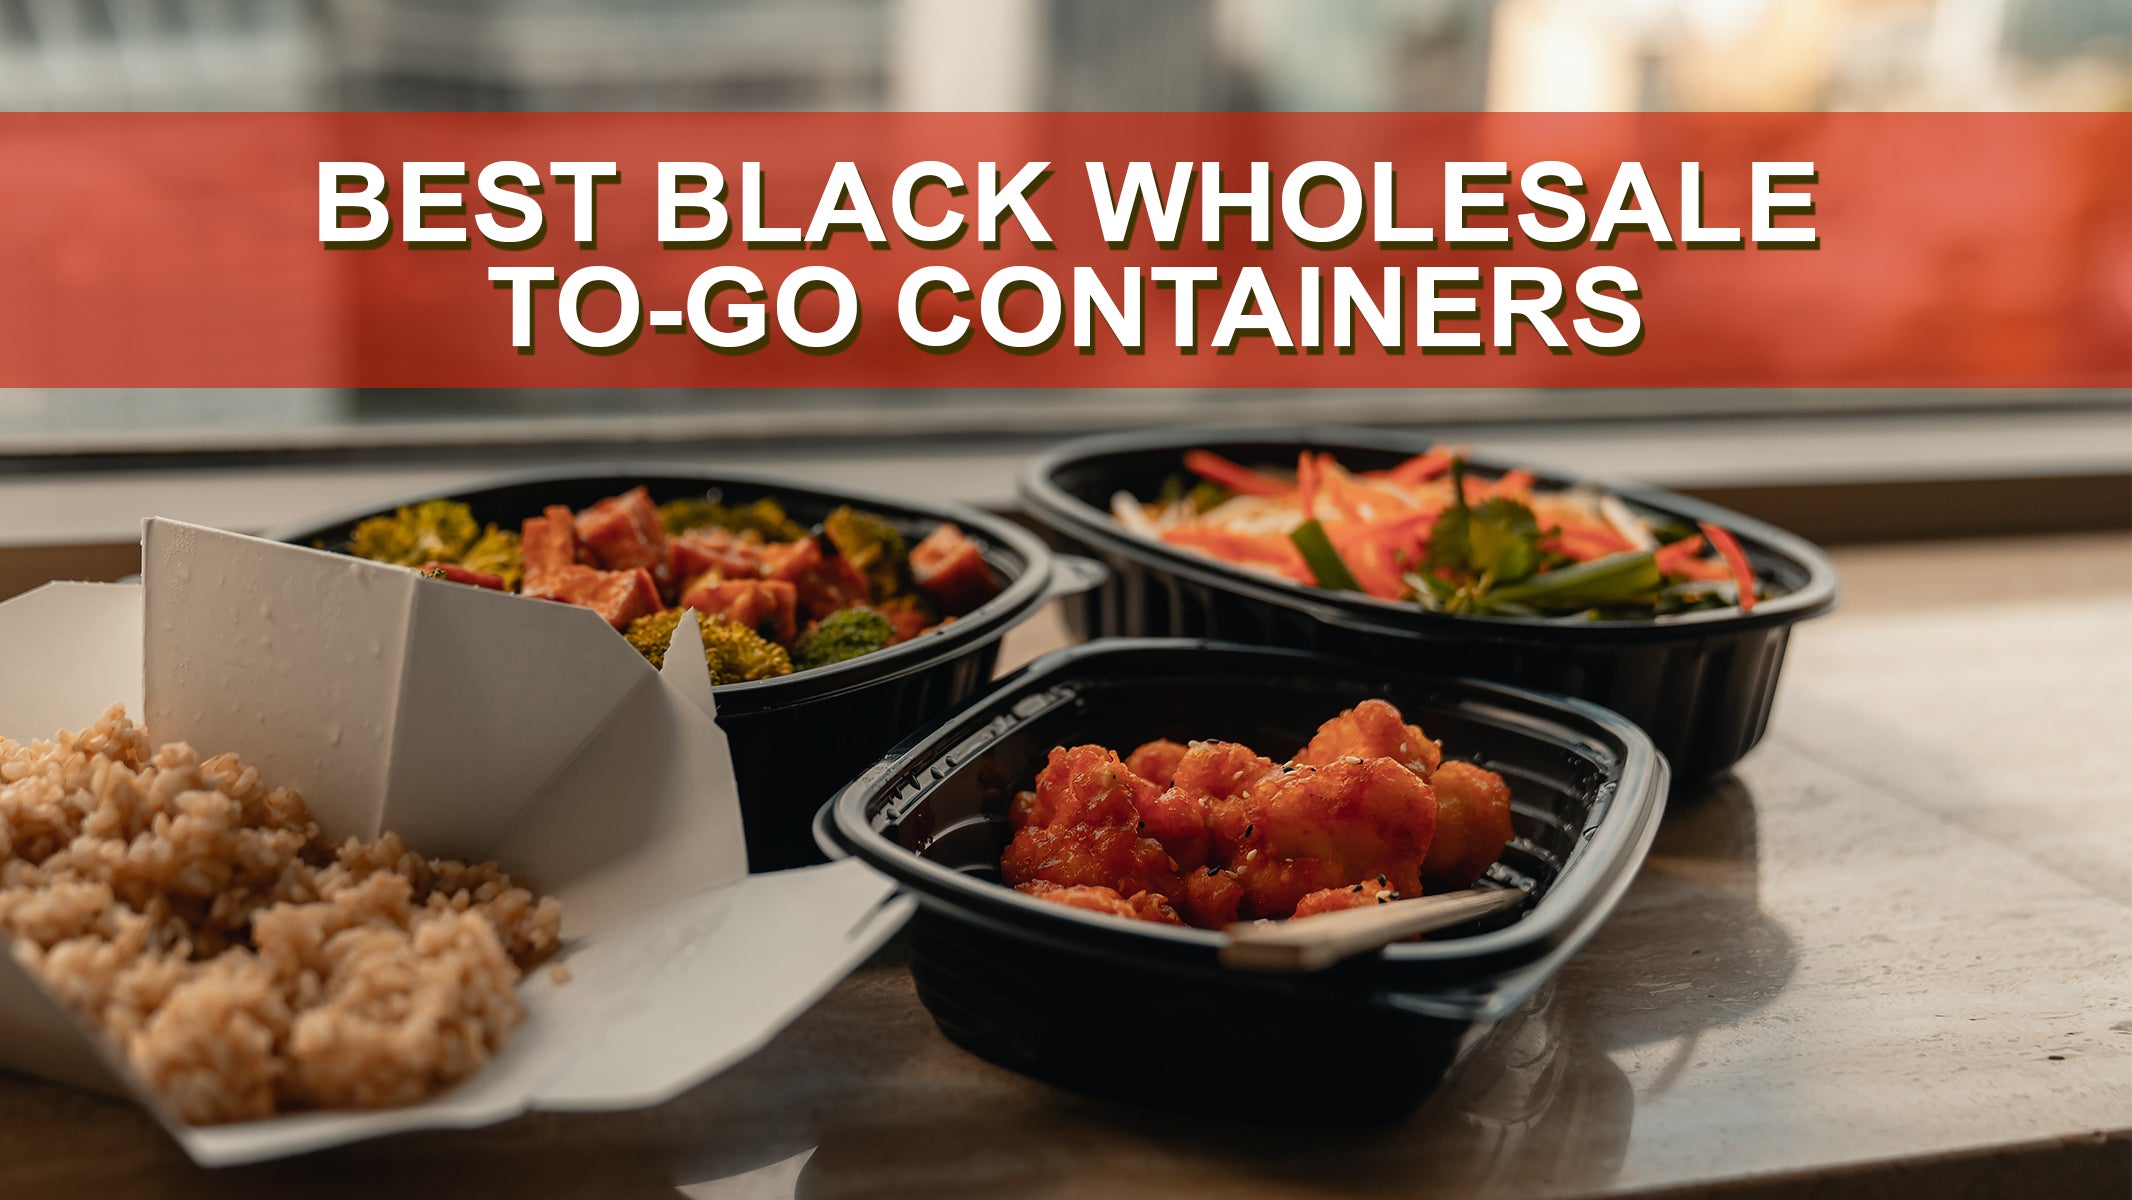 Best Black Wholesale To-Go Containers